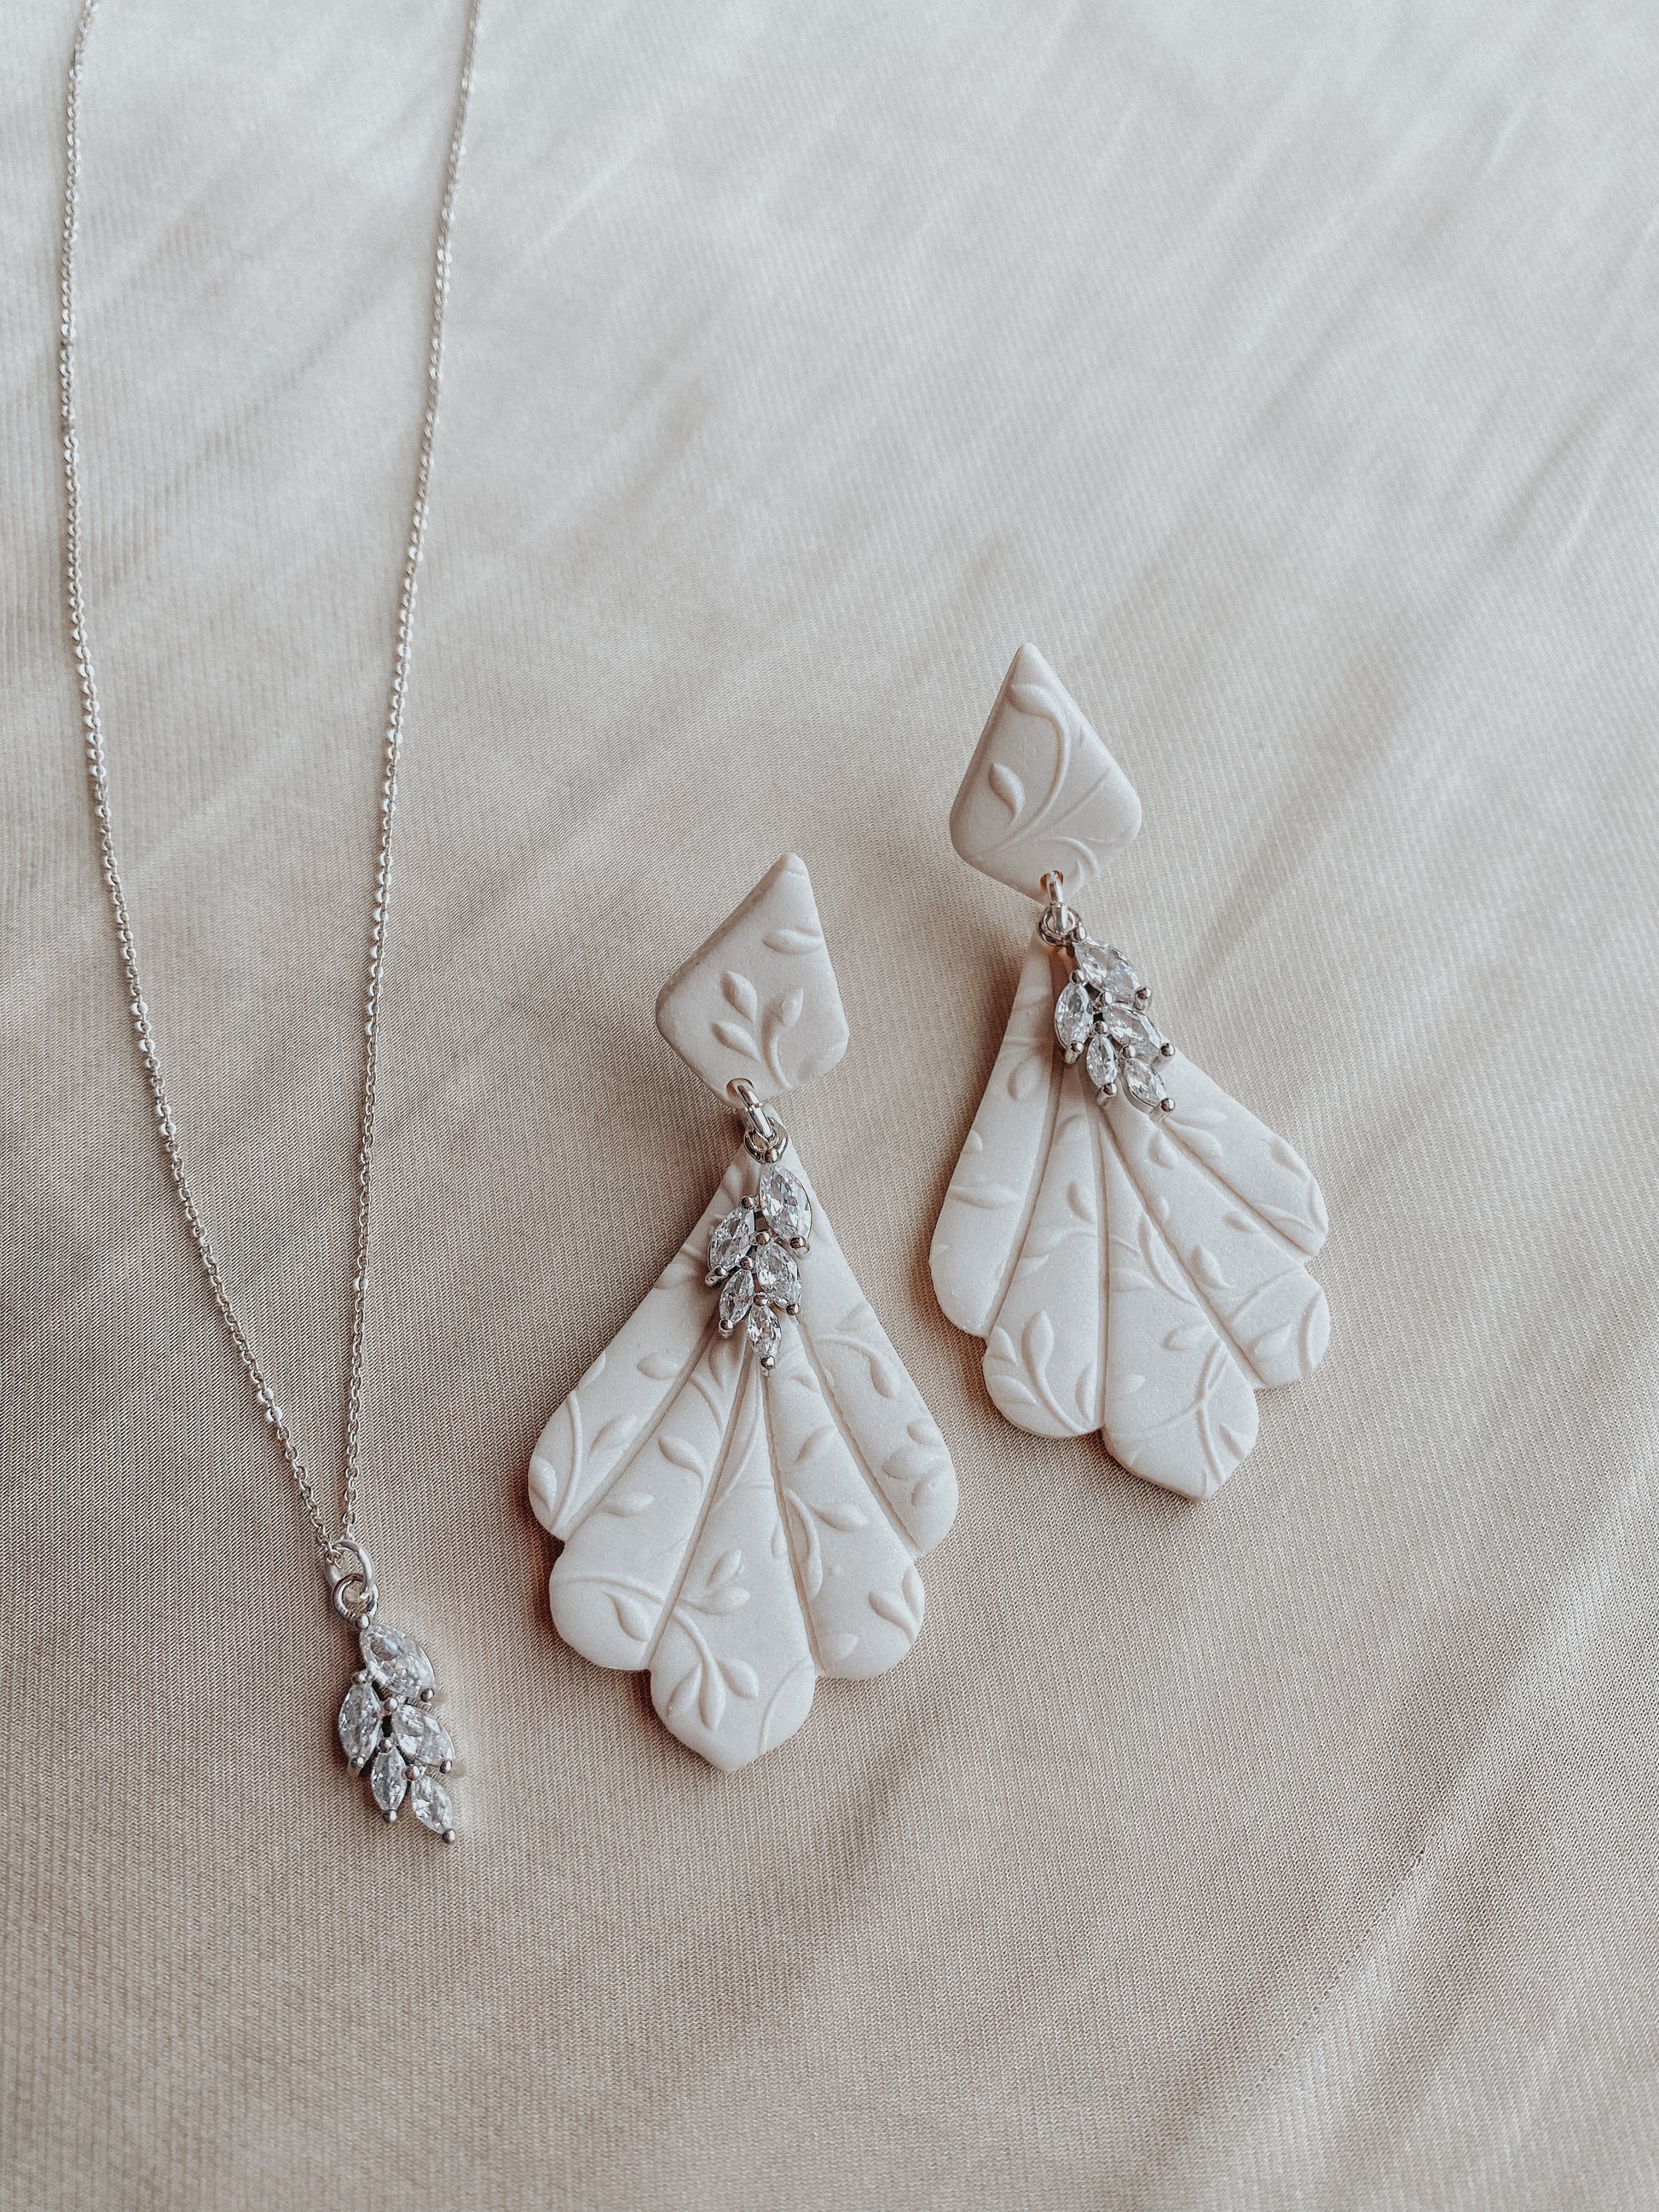 Silver Clay Jewelry Making